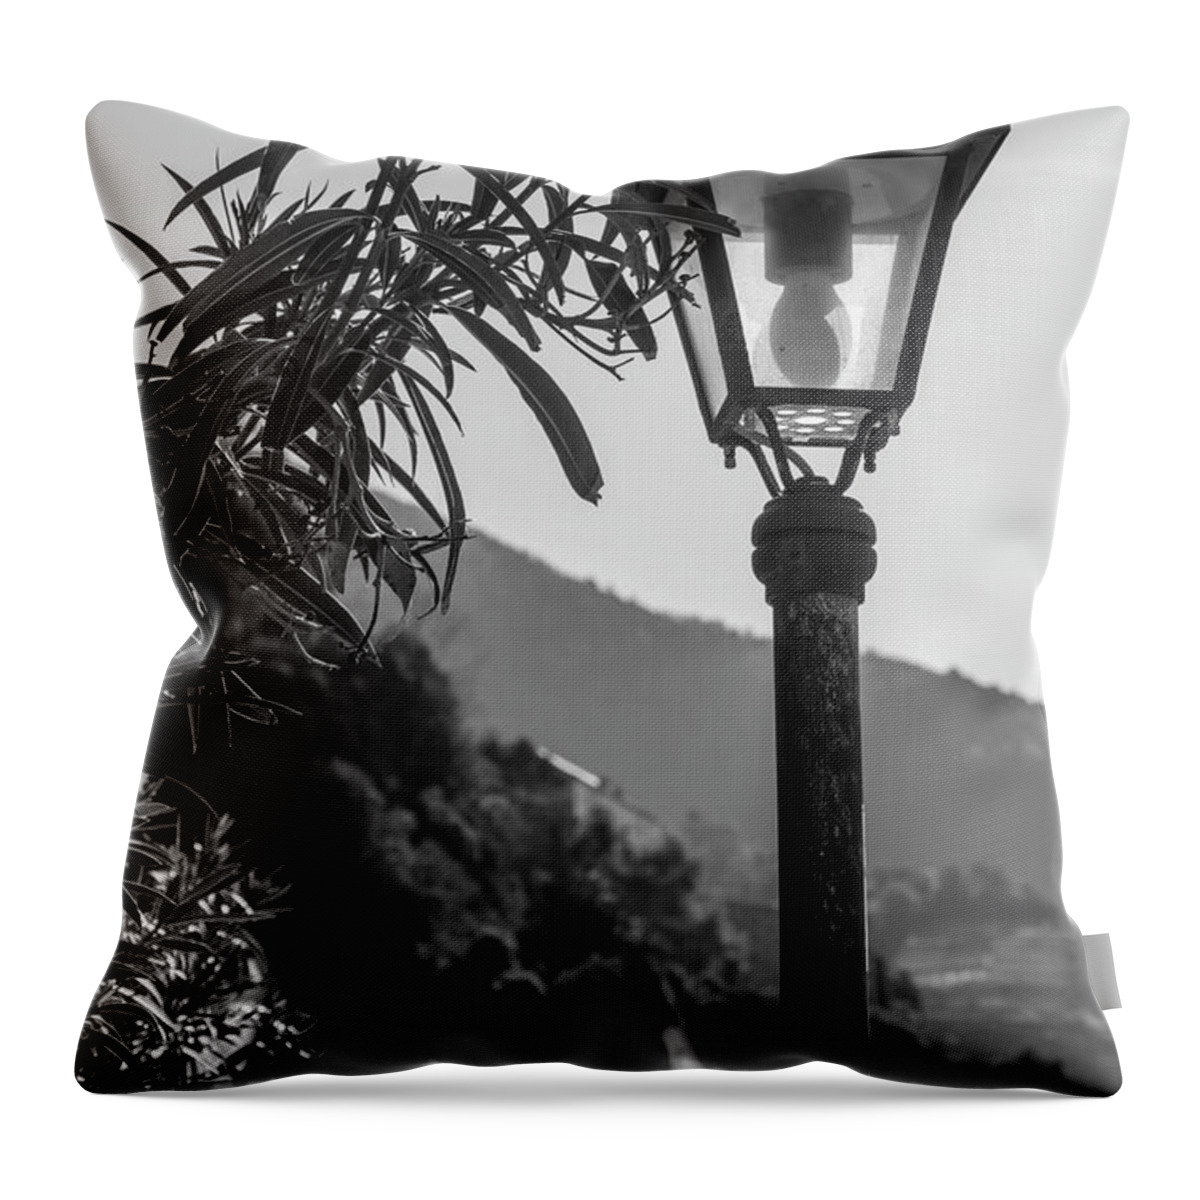 Cinque Terre Throw Pillow featuring the photograph Street Light in Cinque Terre by John McGraw